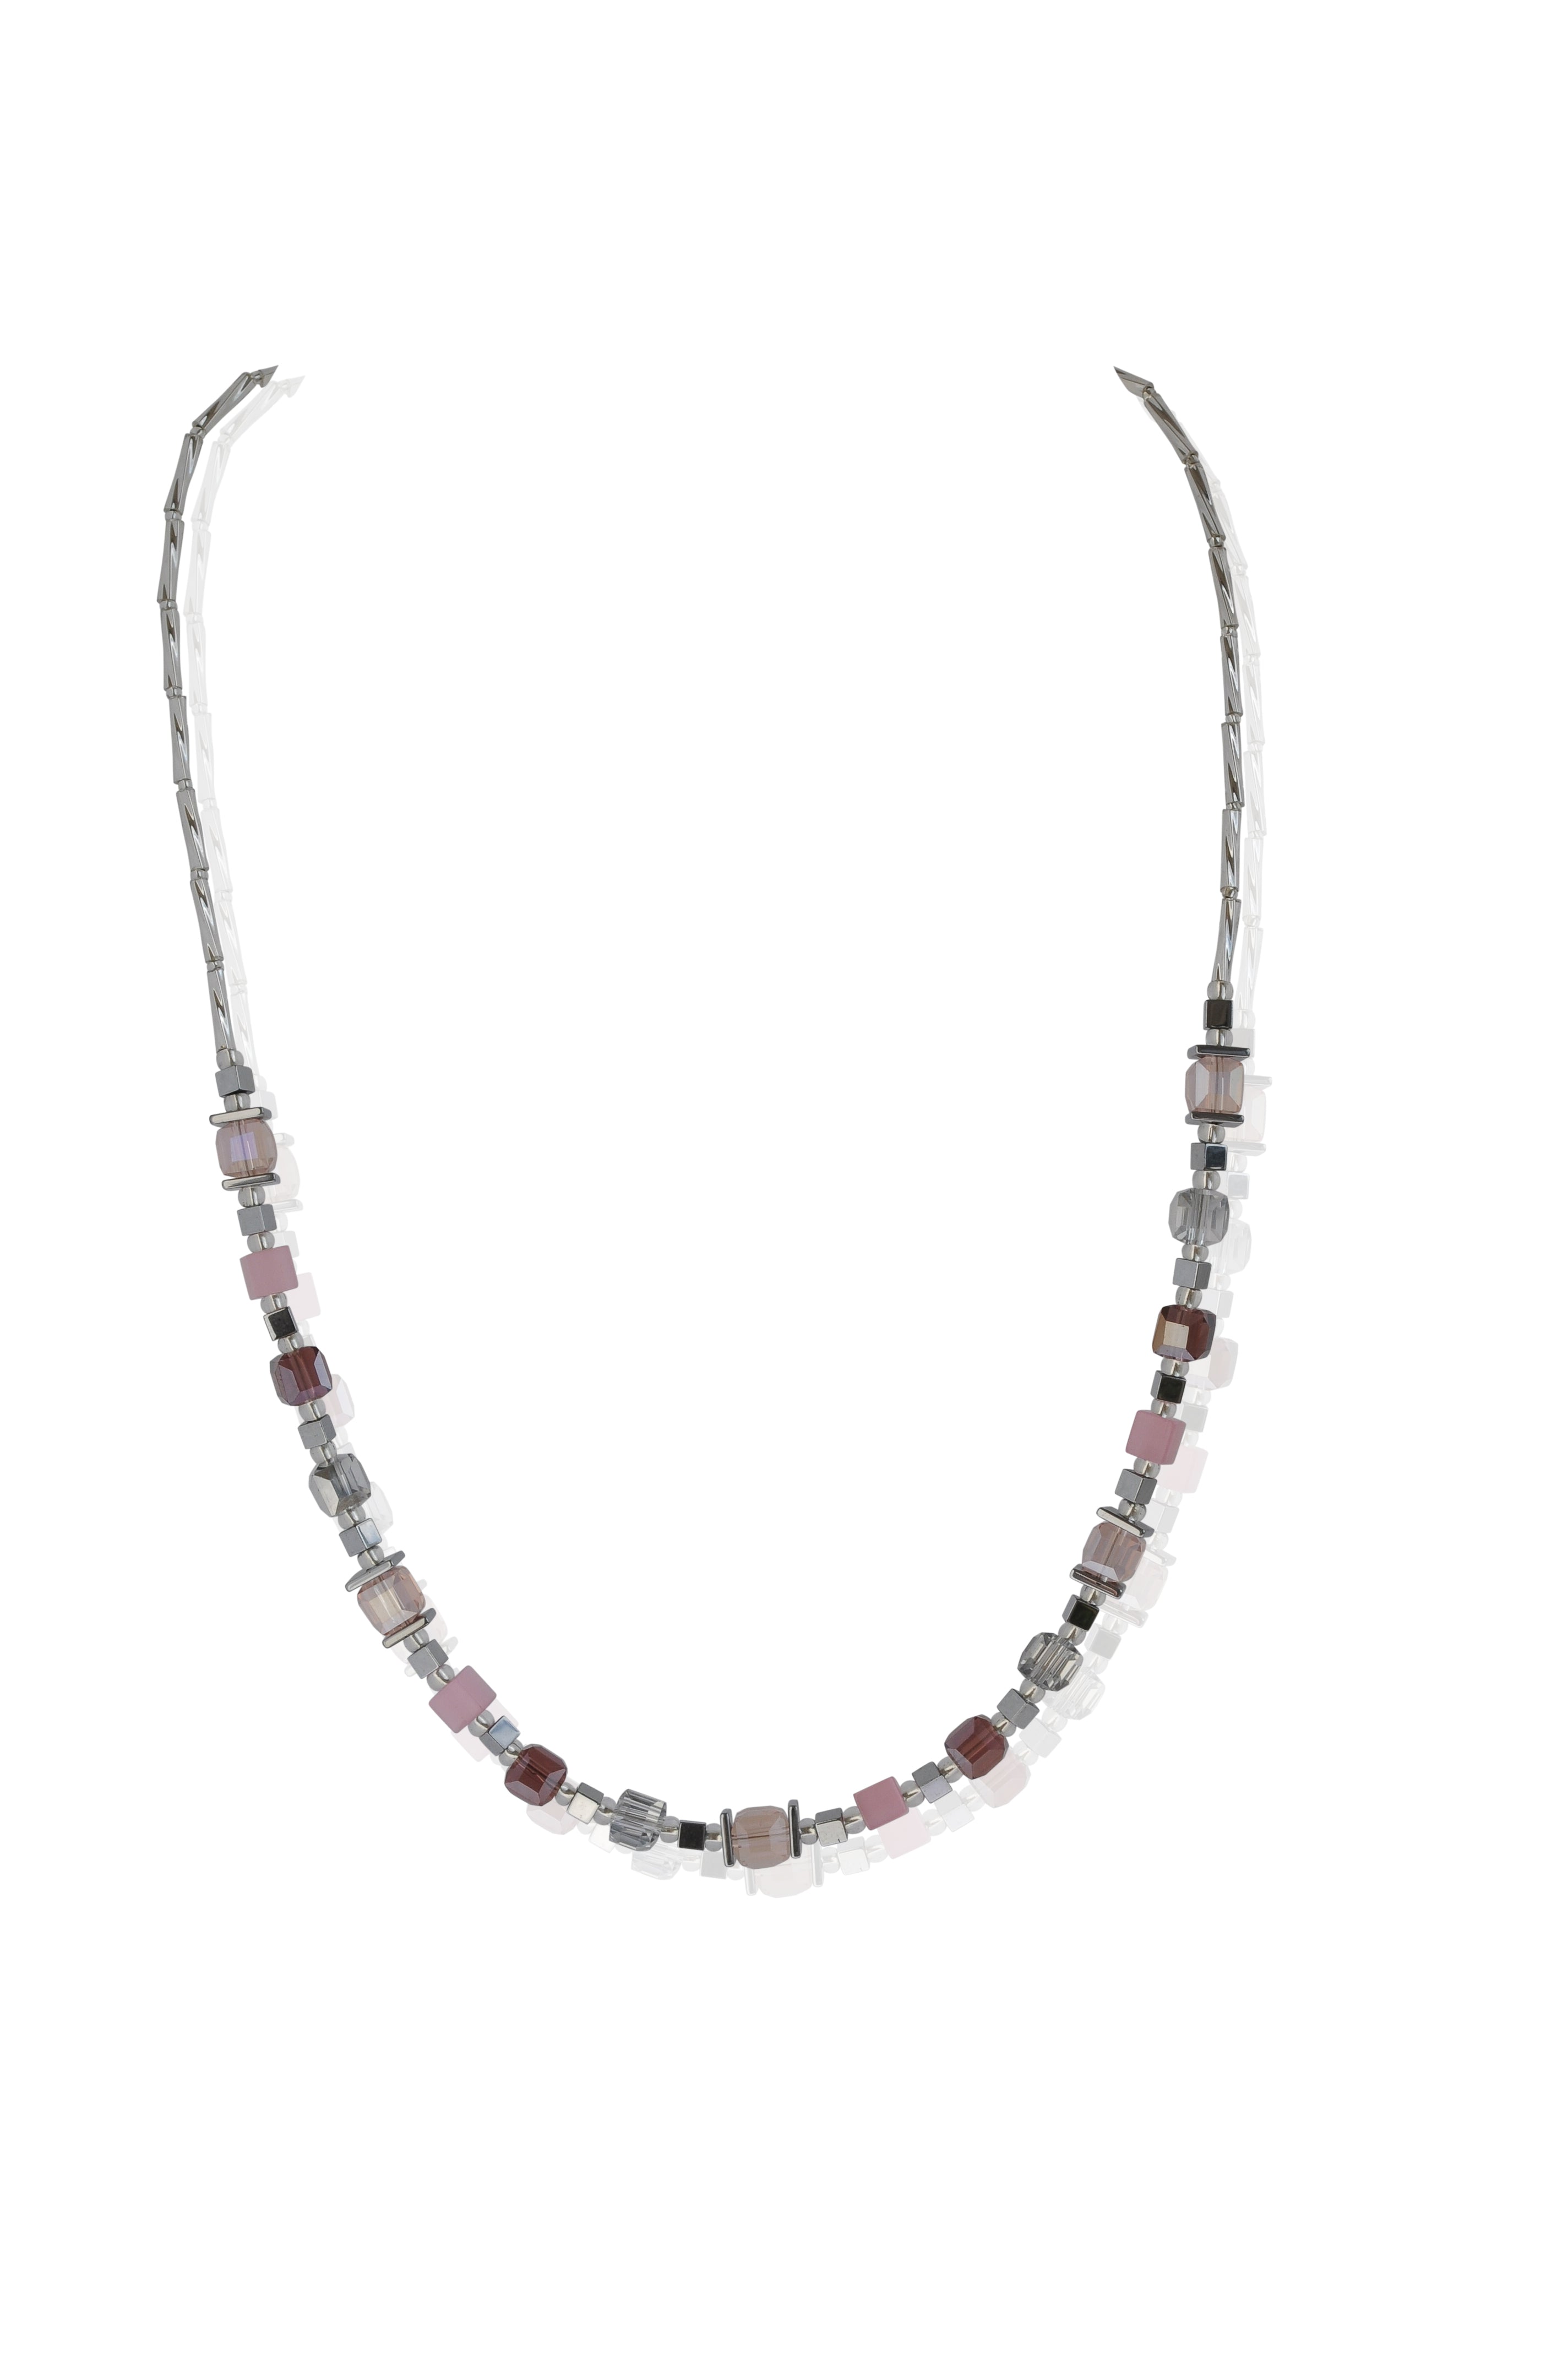 Pink and Lilac Glass Necklace - The Nancy Smillie Shop - Art, Jewellery & Designer Gifts Glasgow